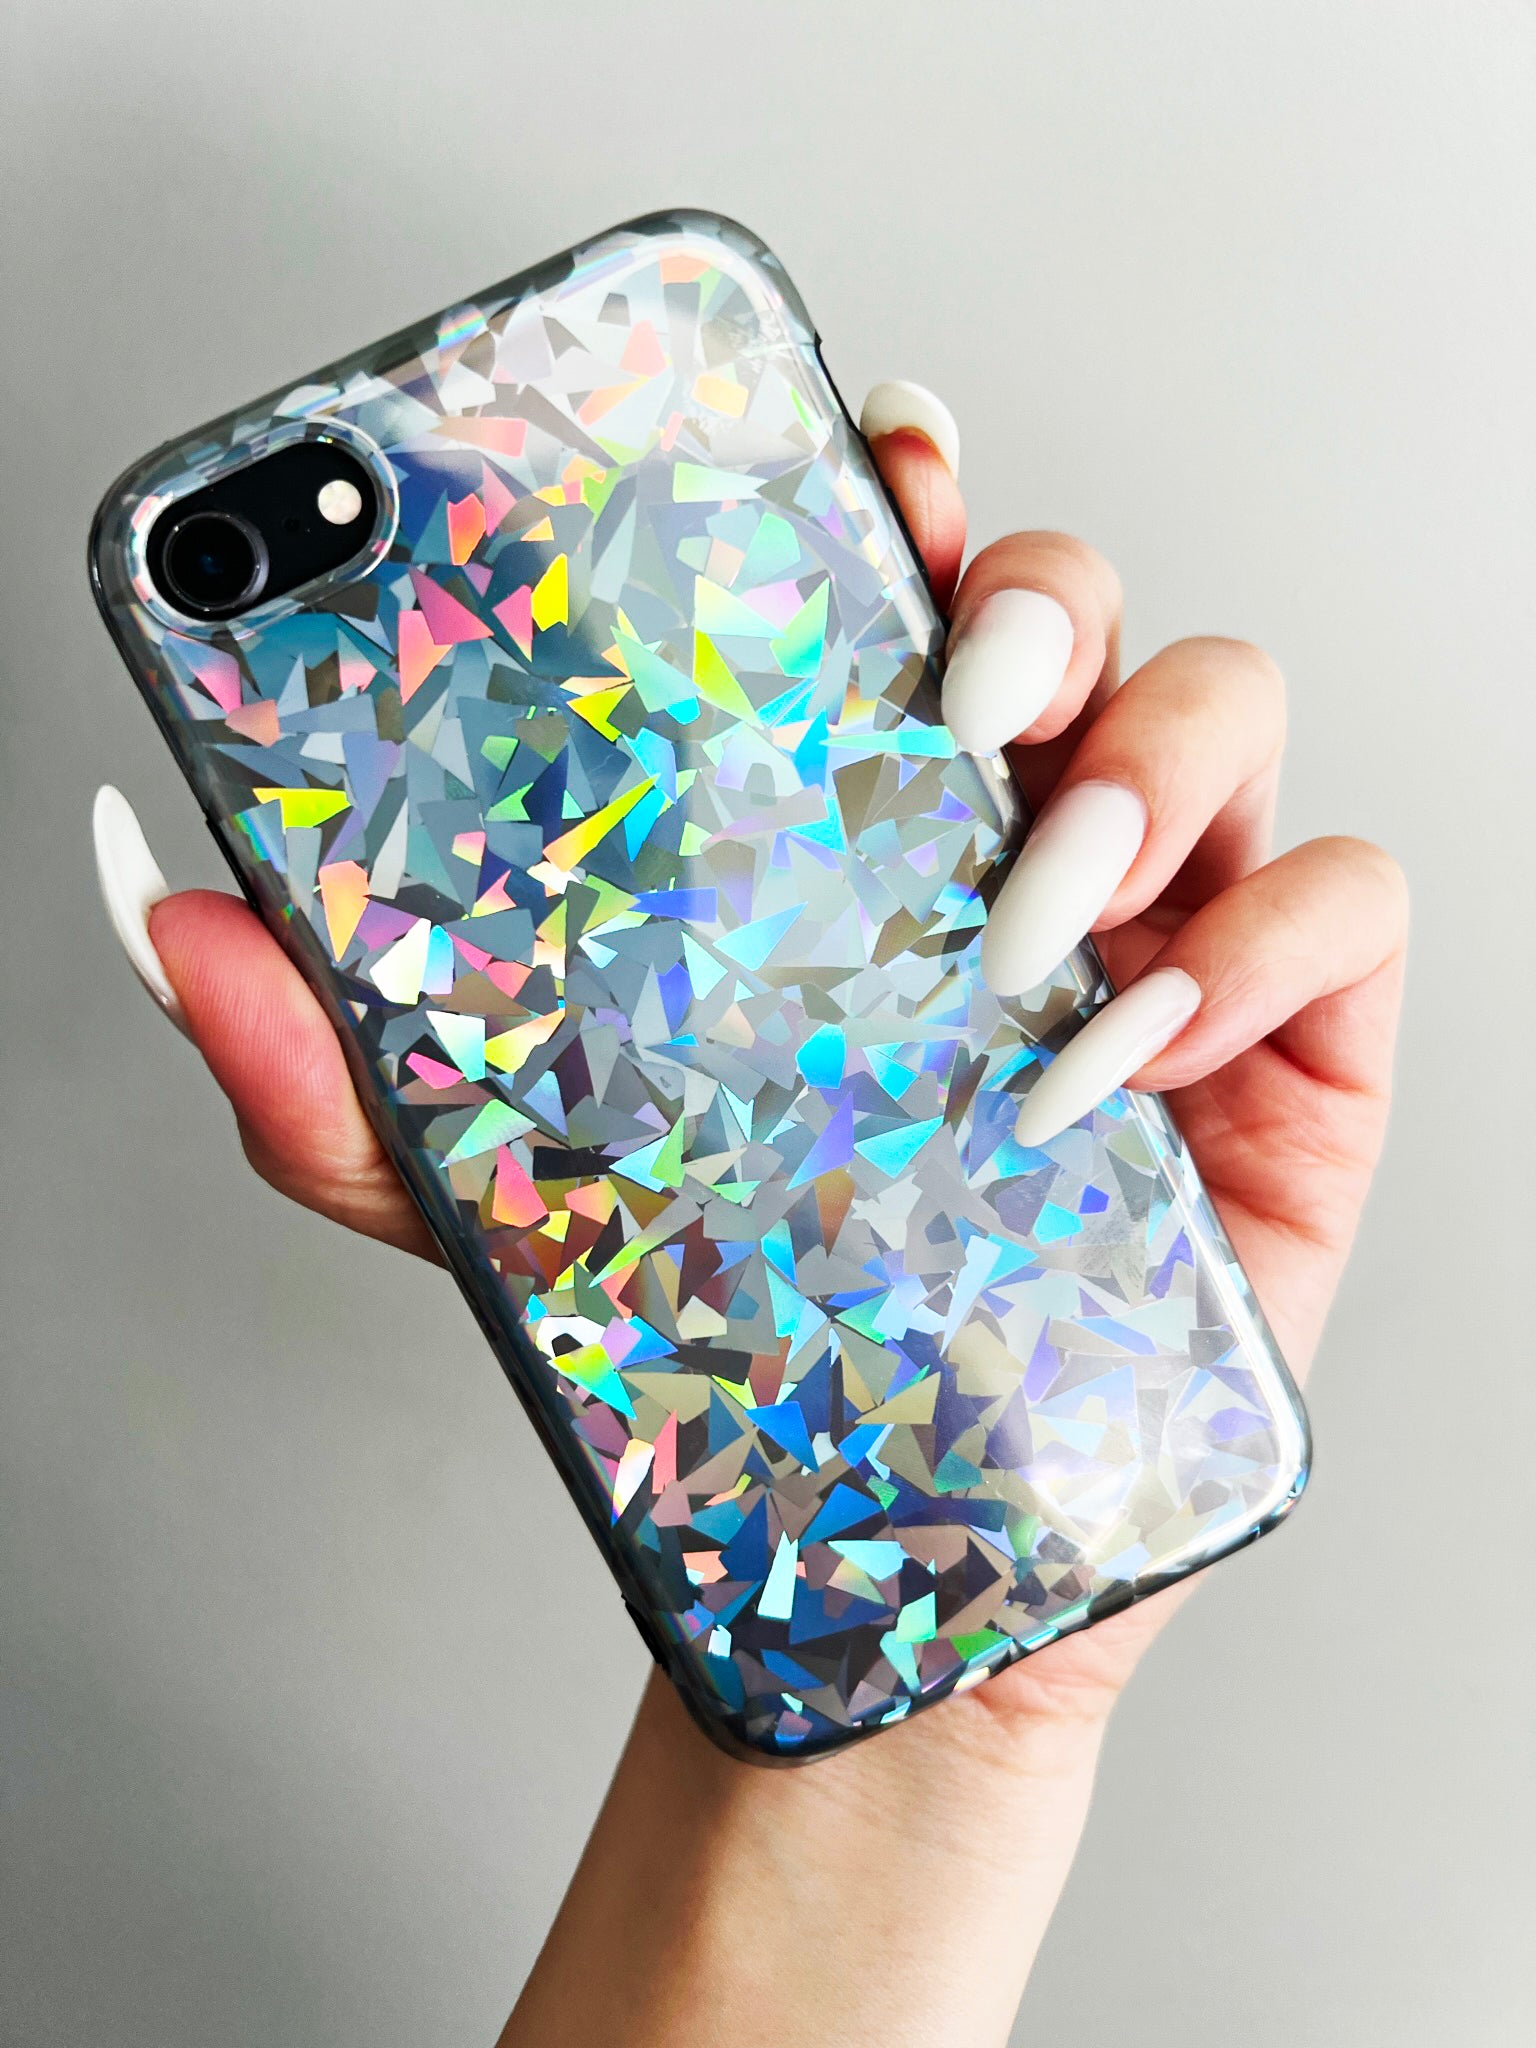 Colorful and super shiny holographic iphone case in front of a grey wall - Laser Focus by KokoLoveCo